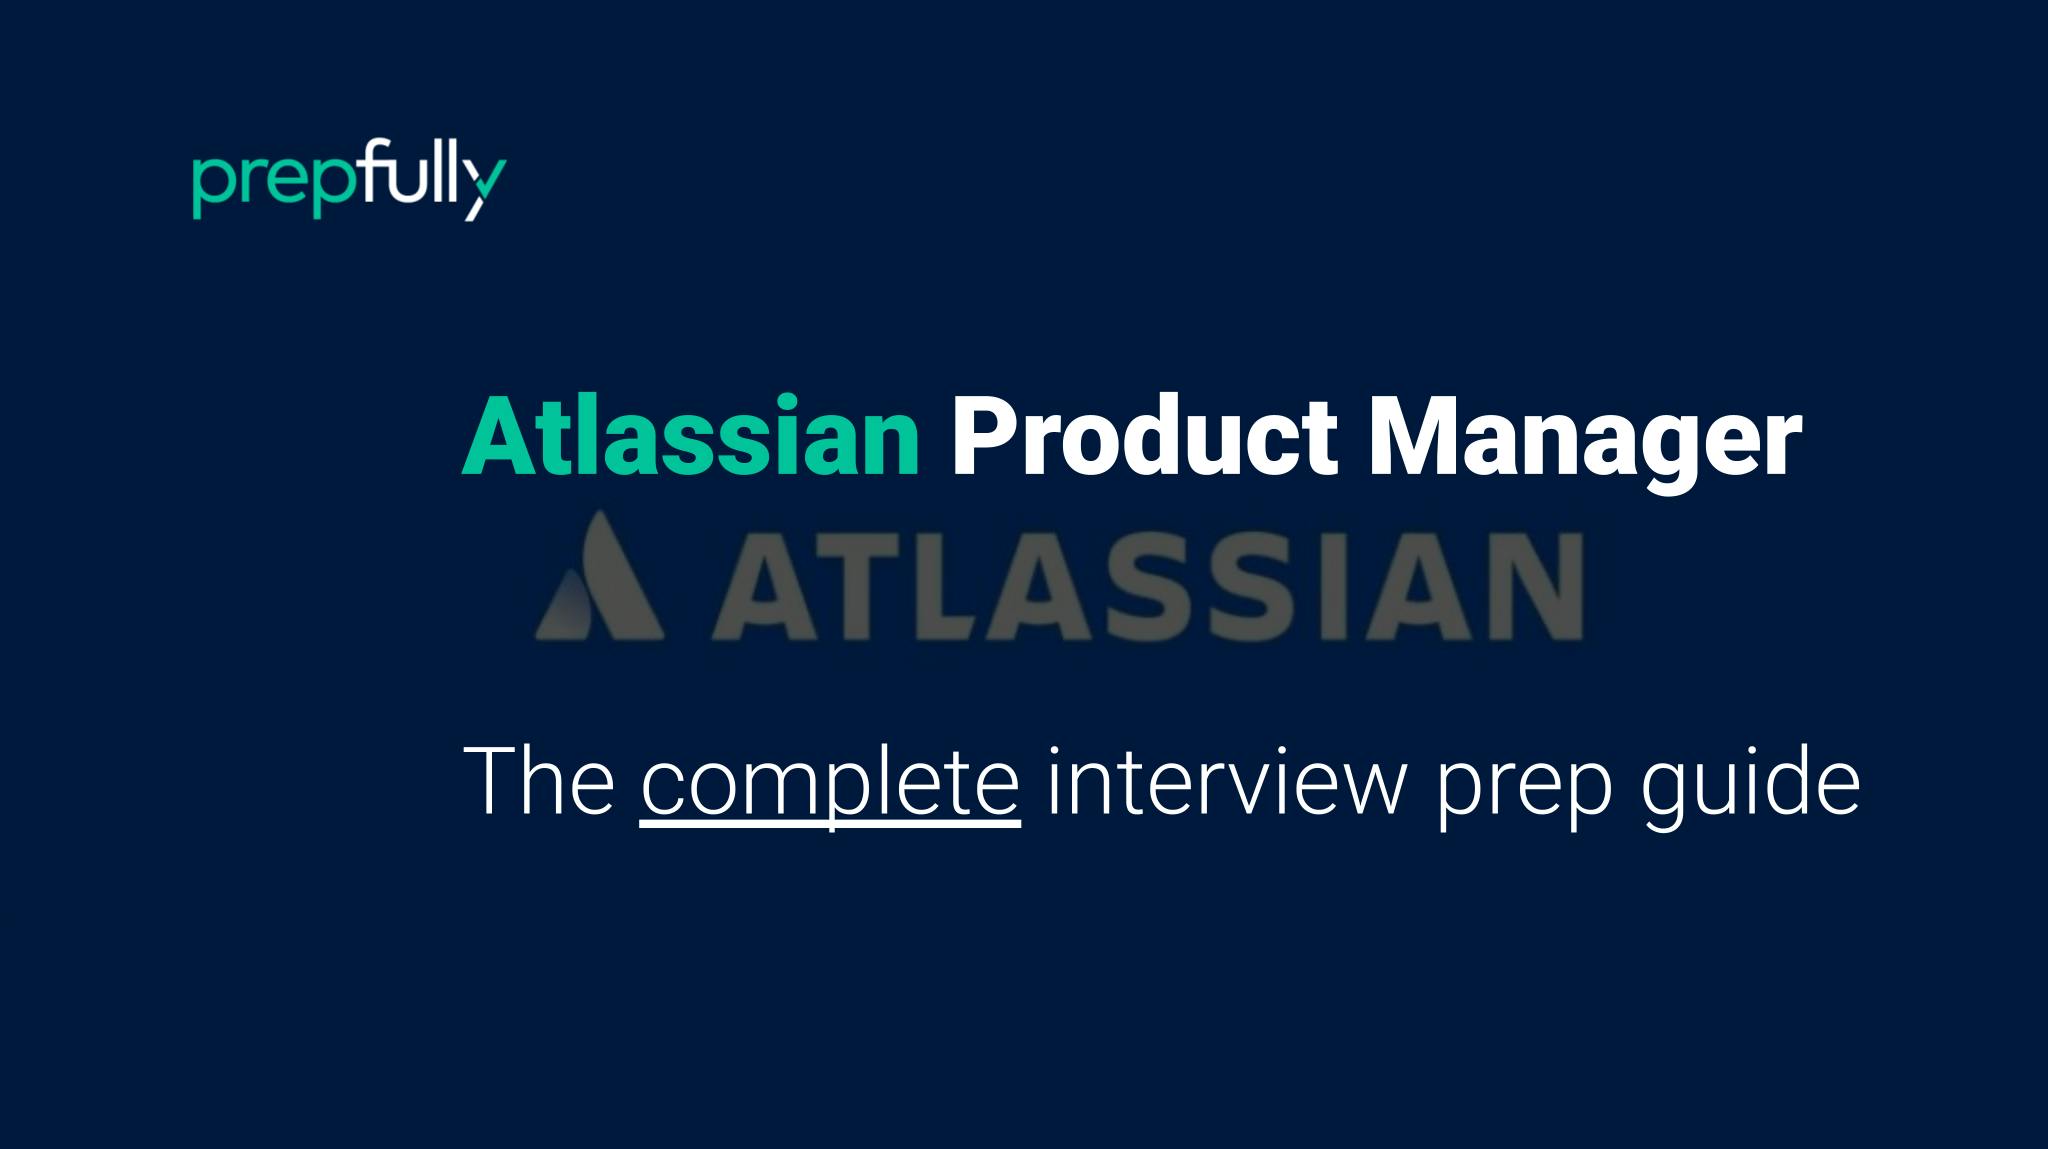 Interview guide for Atlassian Product Manager